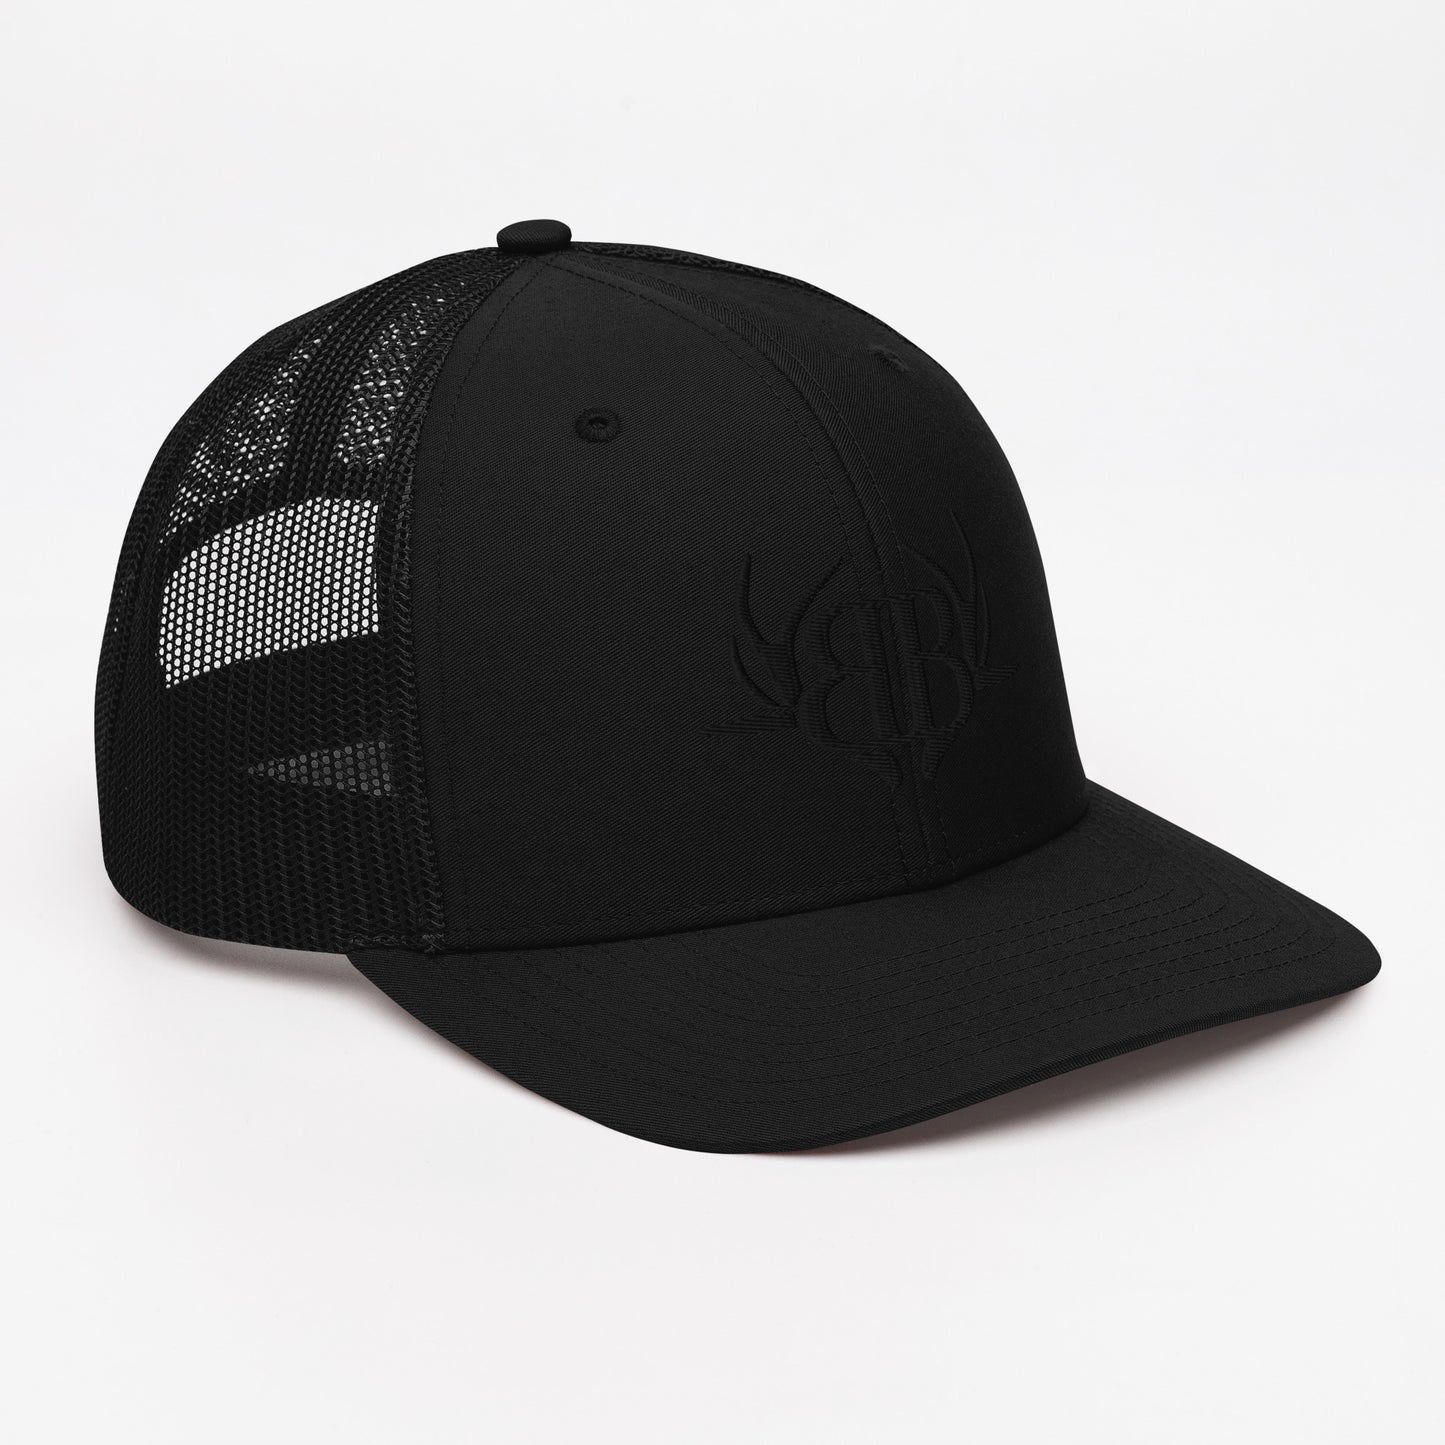 BLACKED OUT Trucker Cap